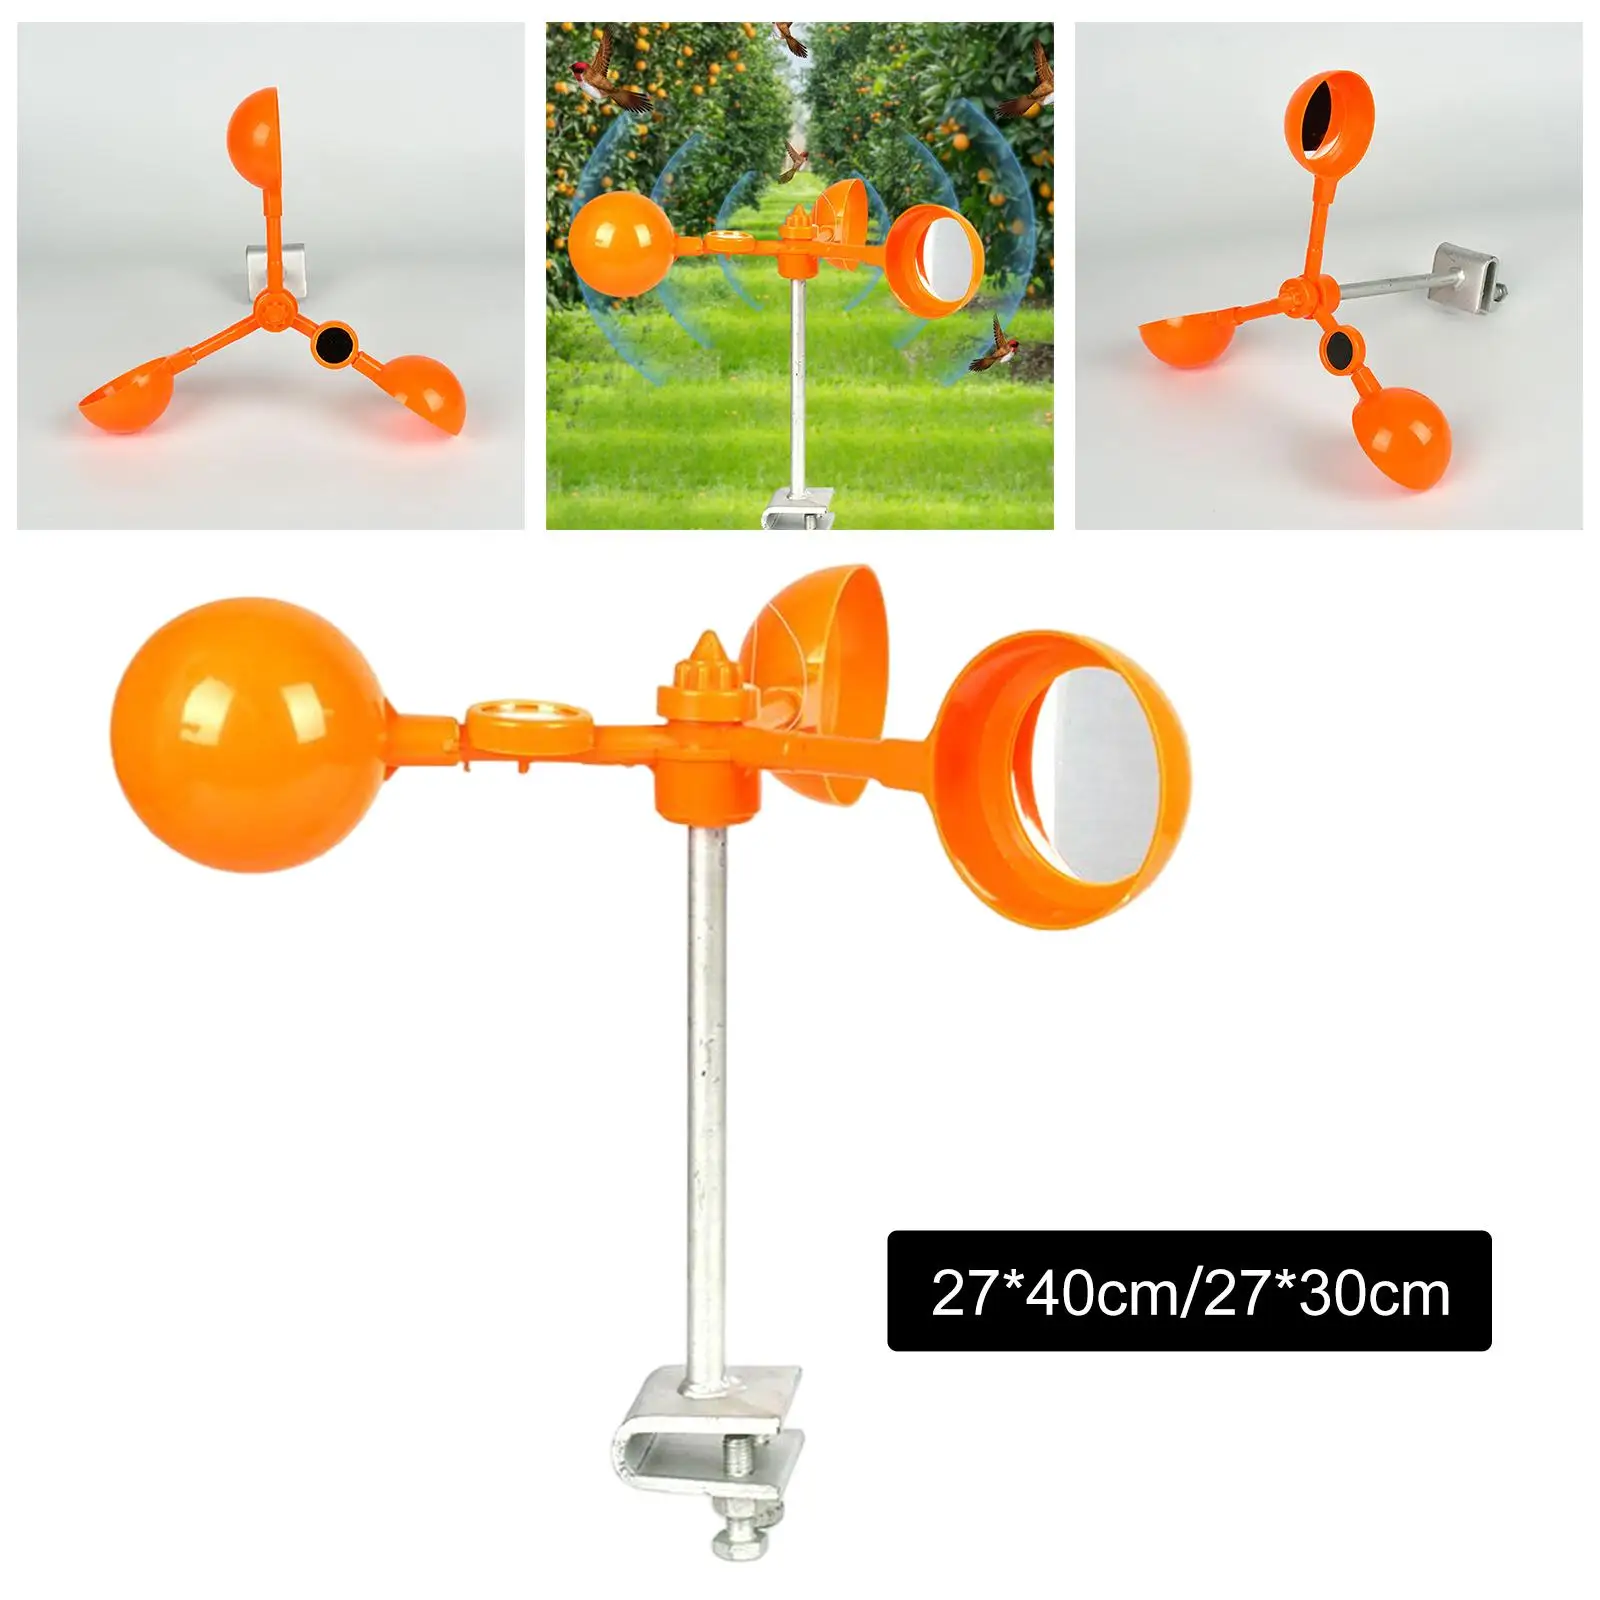 Wind Powered Bird Repellers For Driving Birds Away From Power Fan Rotation Bird Repellent Device Anti-bird Tool